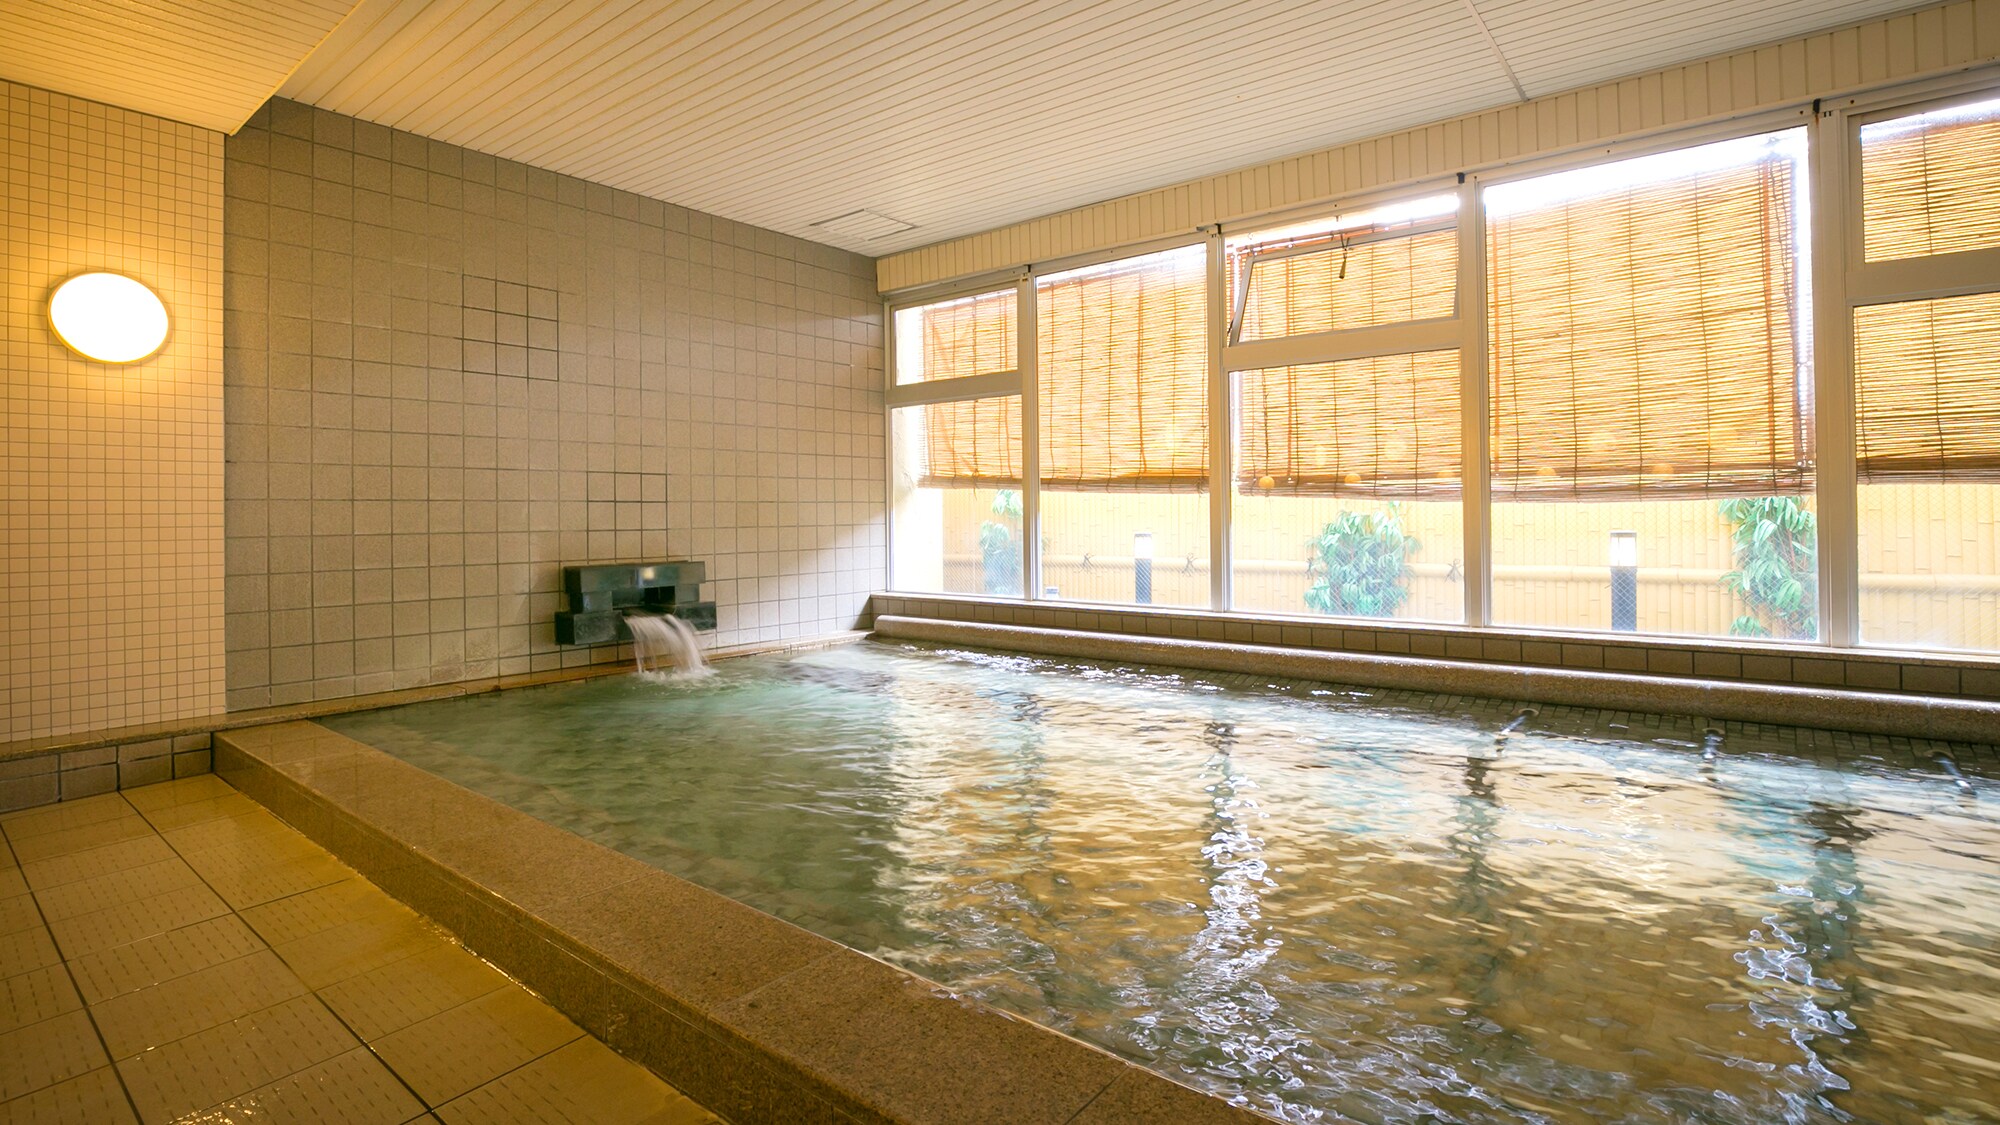 ■ Large communal bath (women's bath) ■ Relax your legs and hands ♪